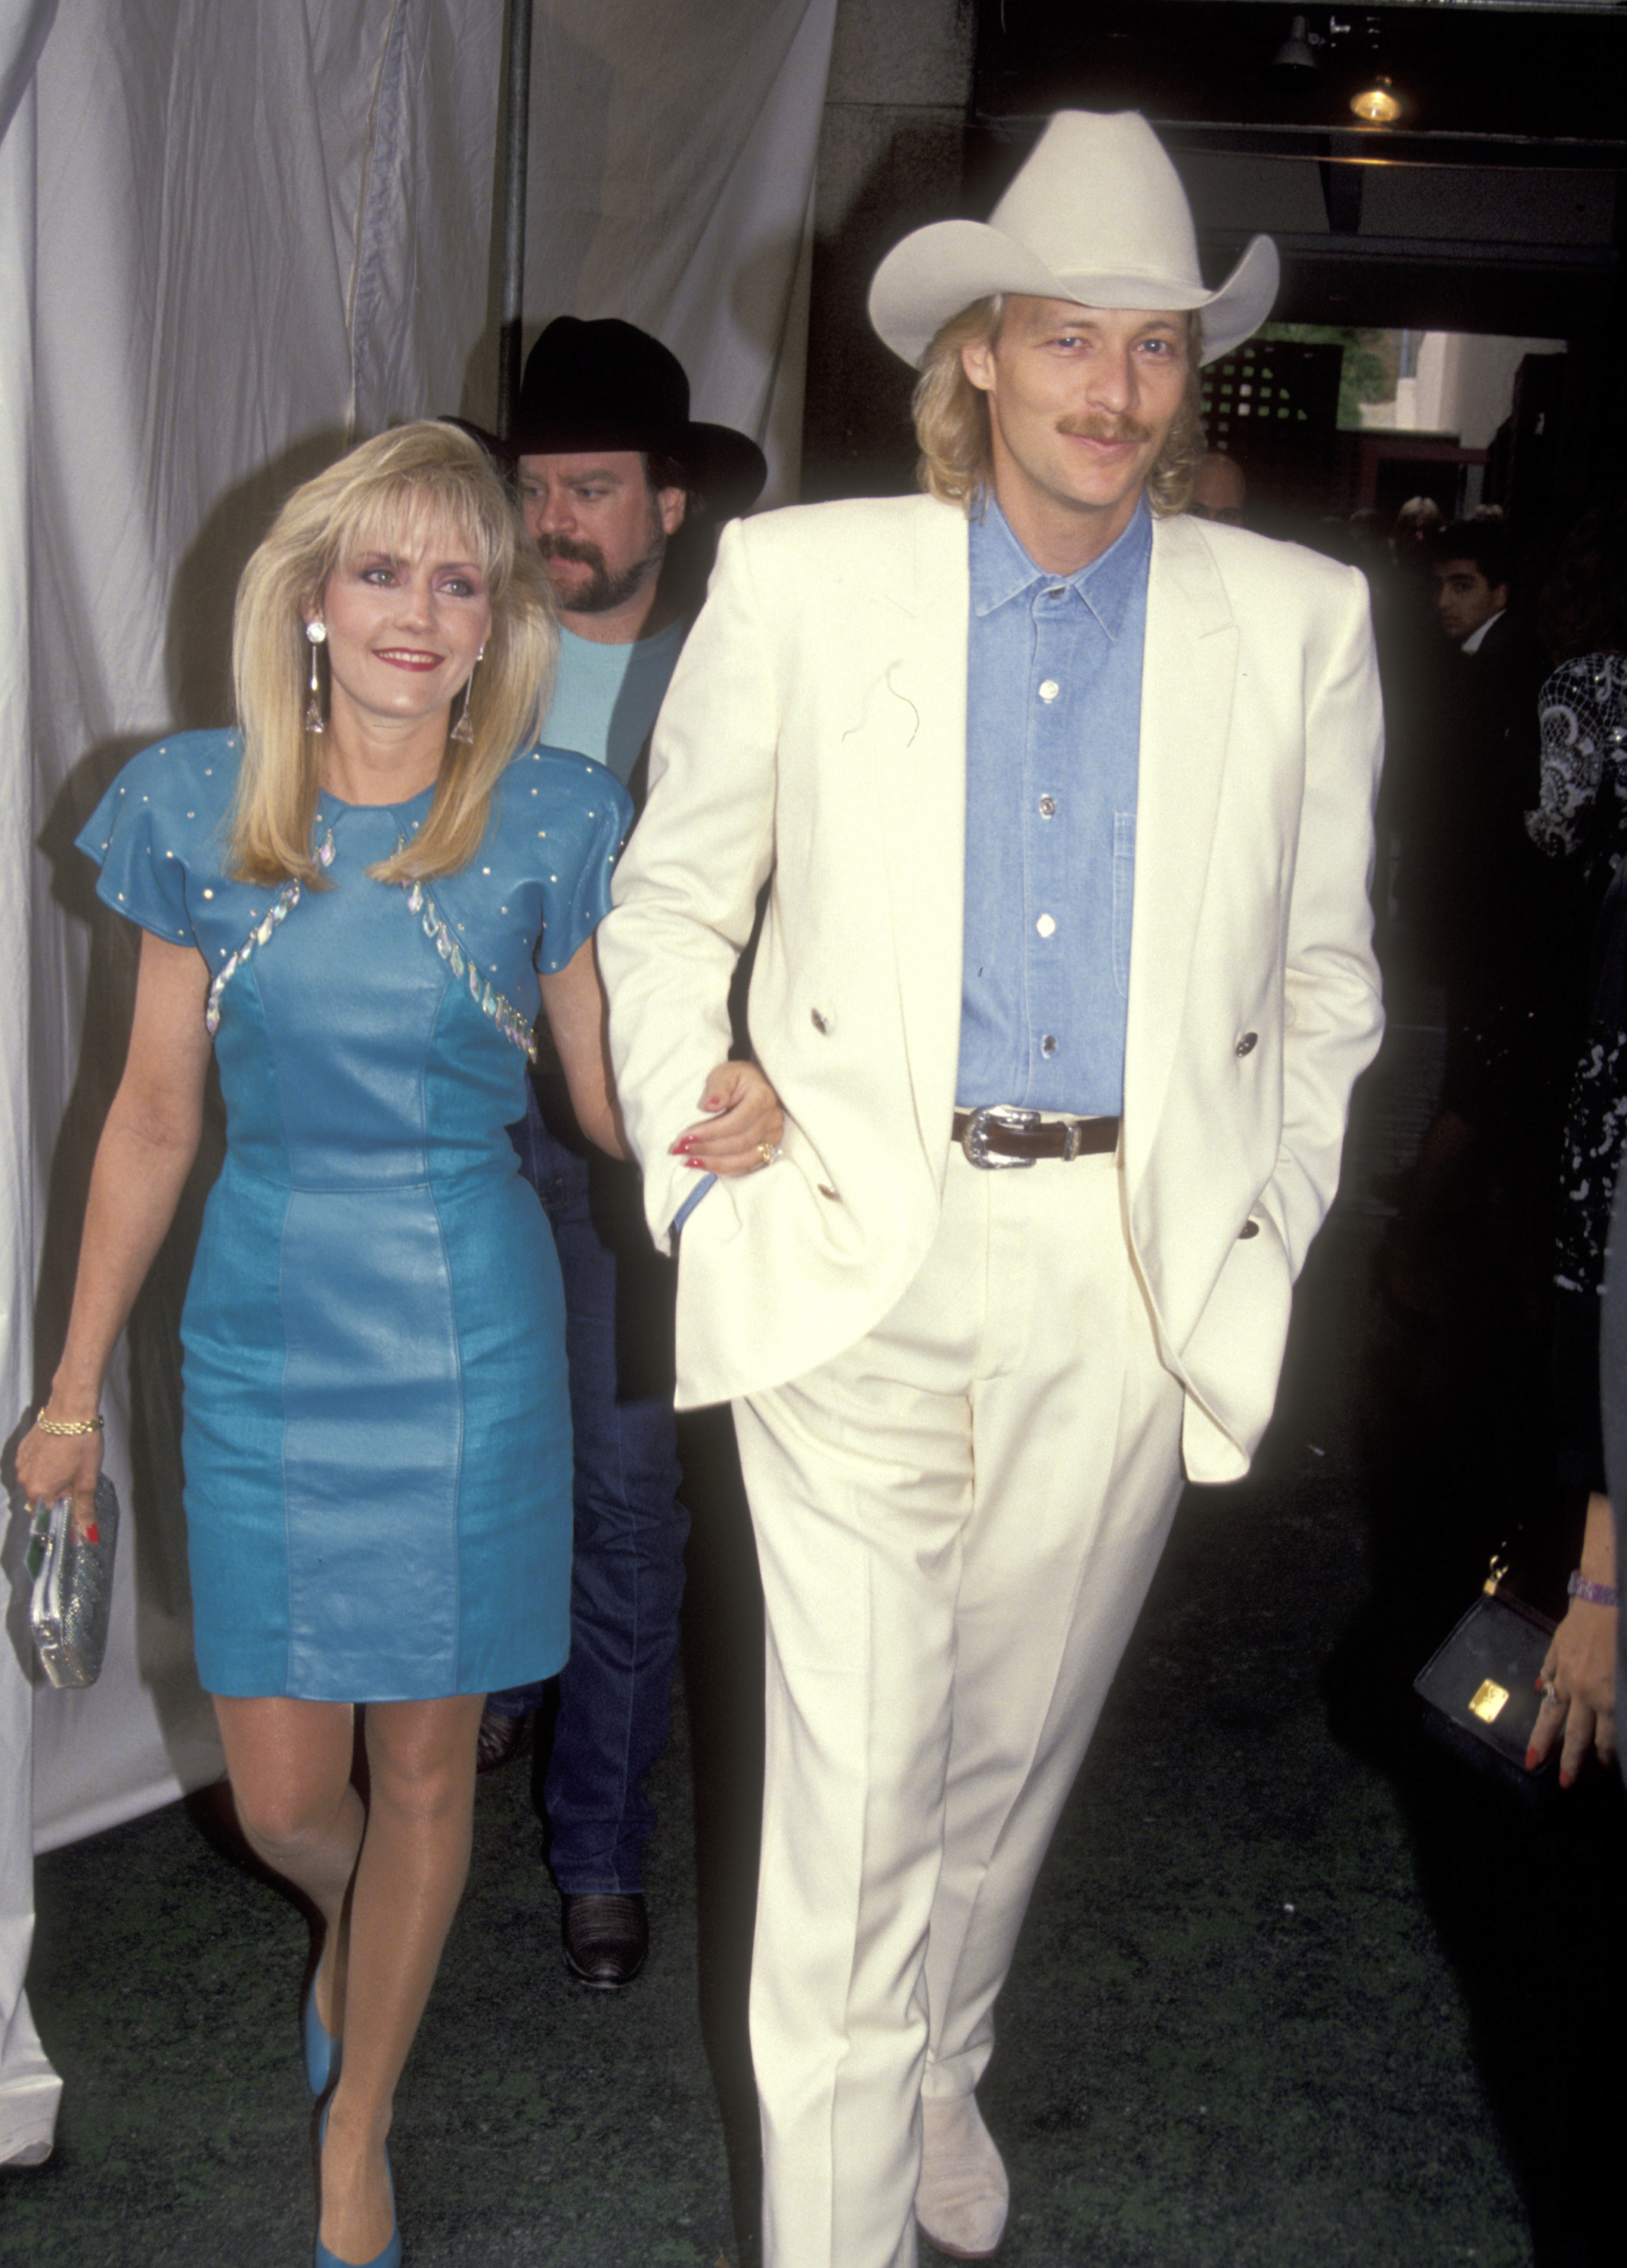 Alan Jackson and his wife Denise attend the 26th Annual Academy of Country Music Awards in Universal City, California | Source: Getty Images